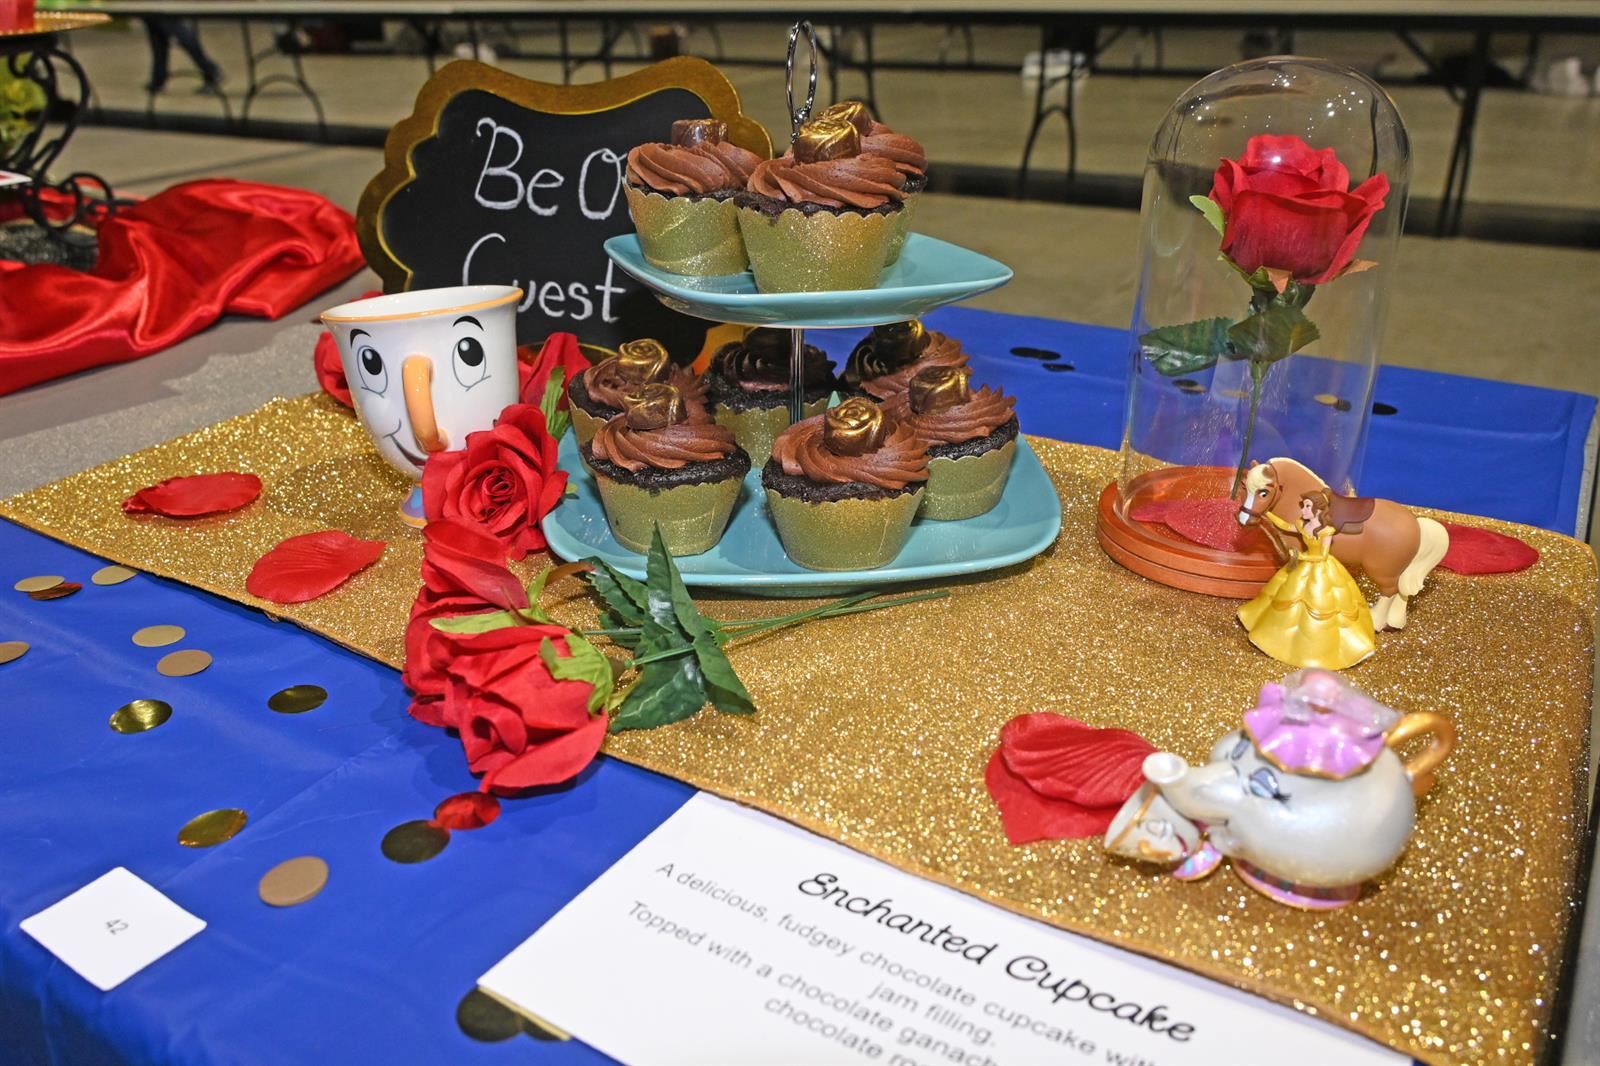 Culinary arts students compete in sixth CFISD Cupcake Battle.